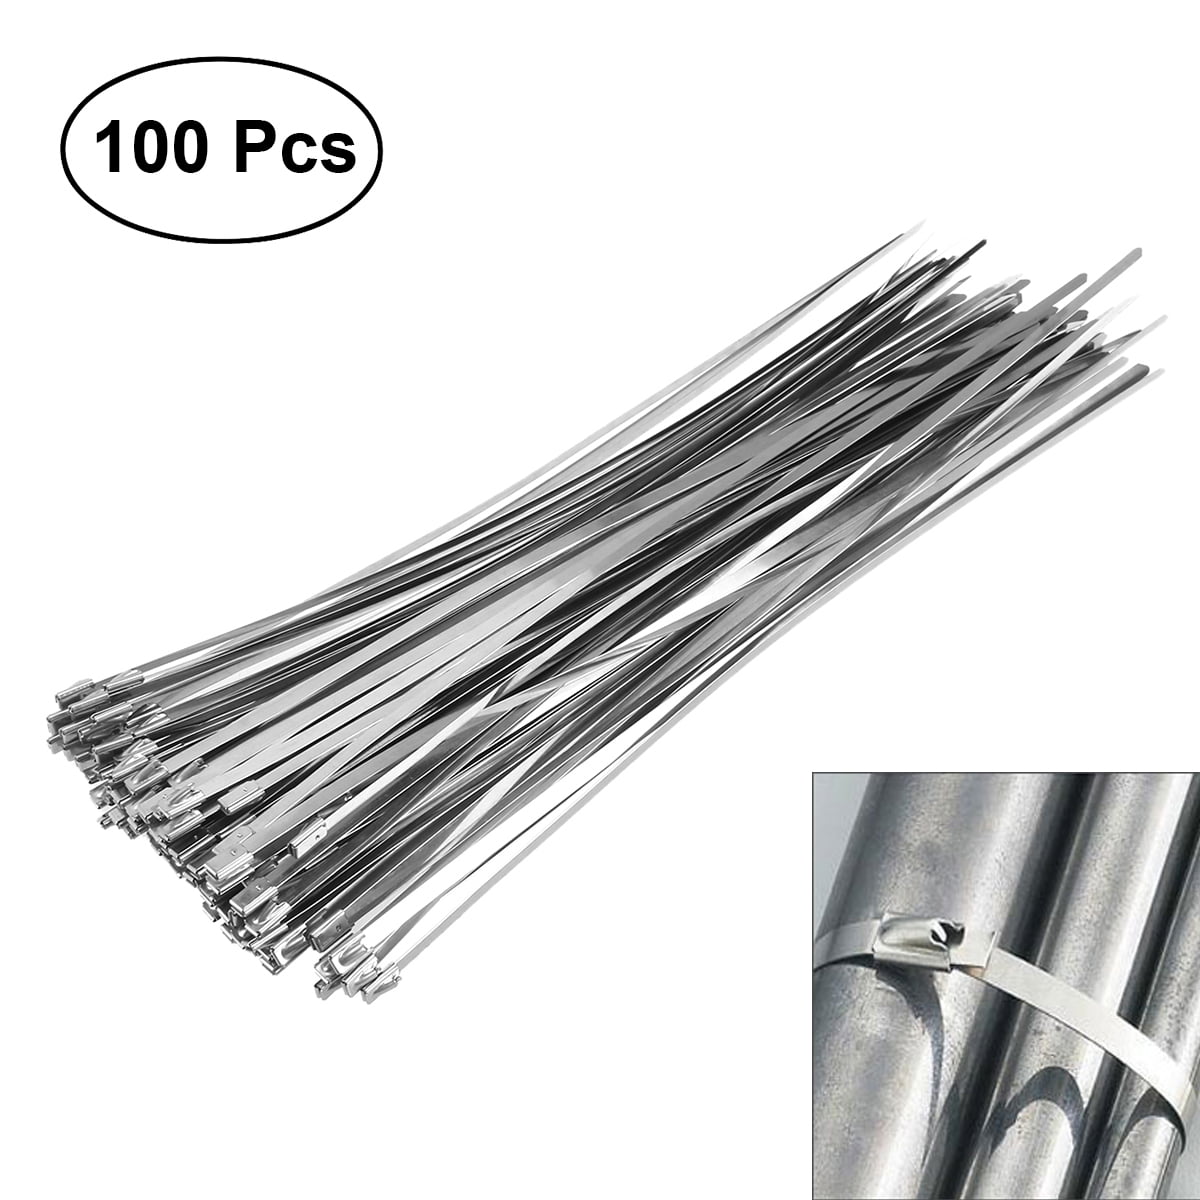 The Elixir 200pcs 11.8 Inches Stainless Steel Exhaust Wrap Coated Self Locking Cable Zip Ties